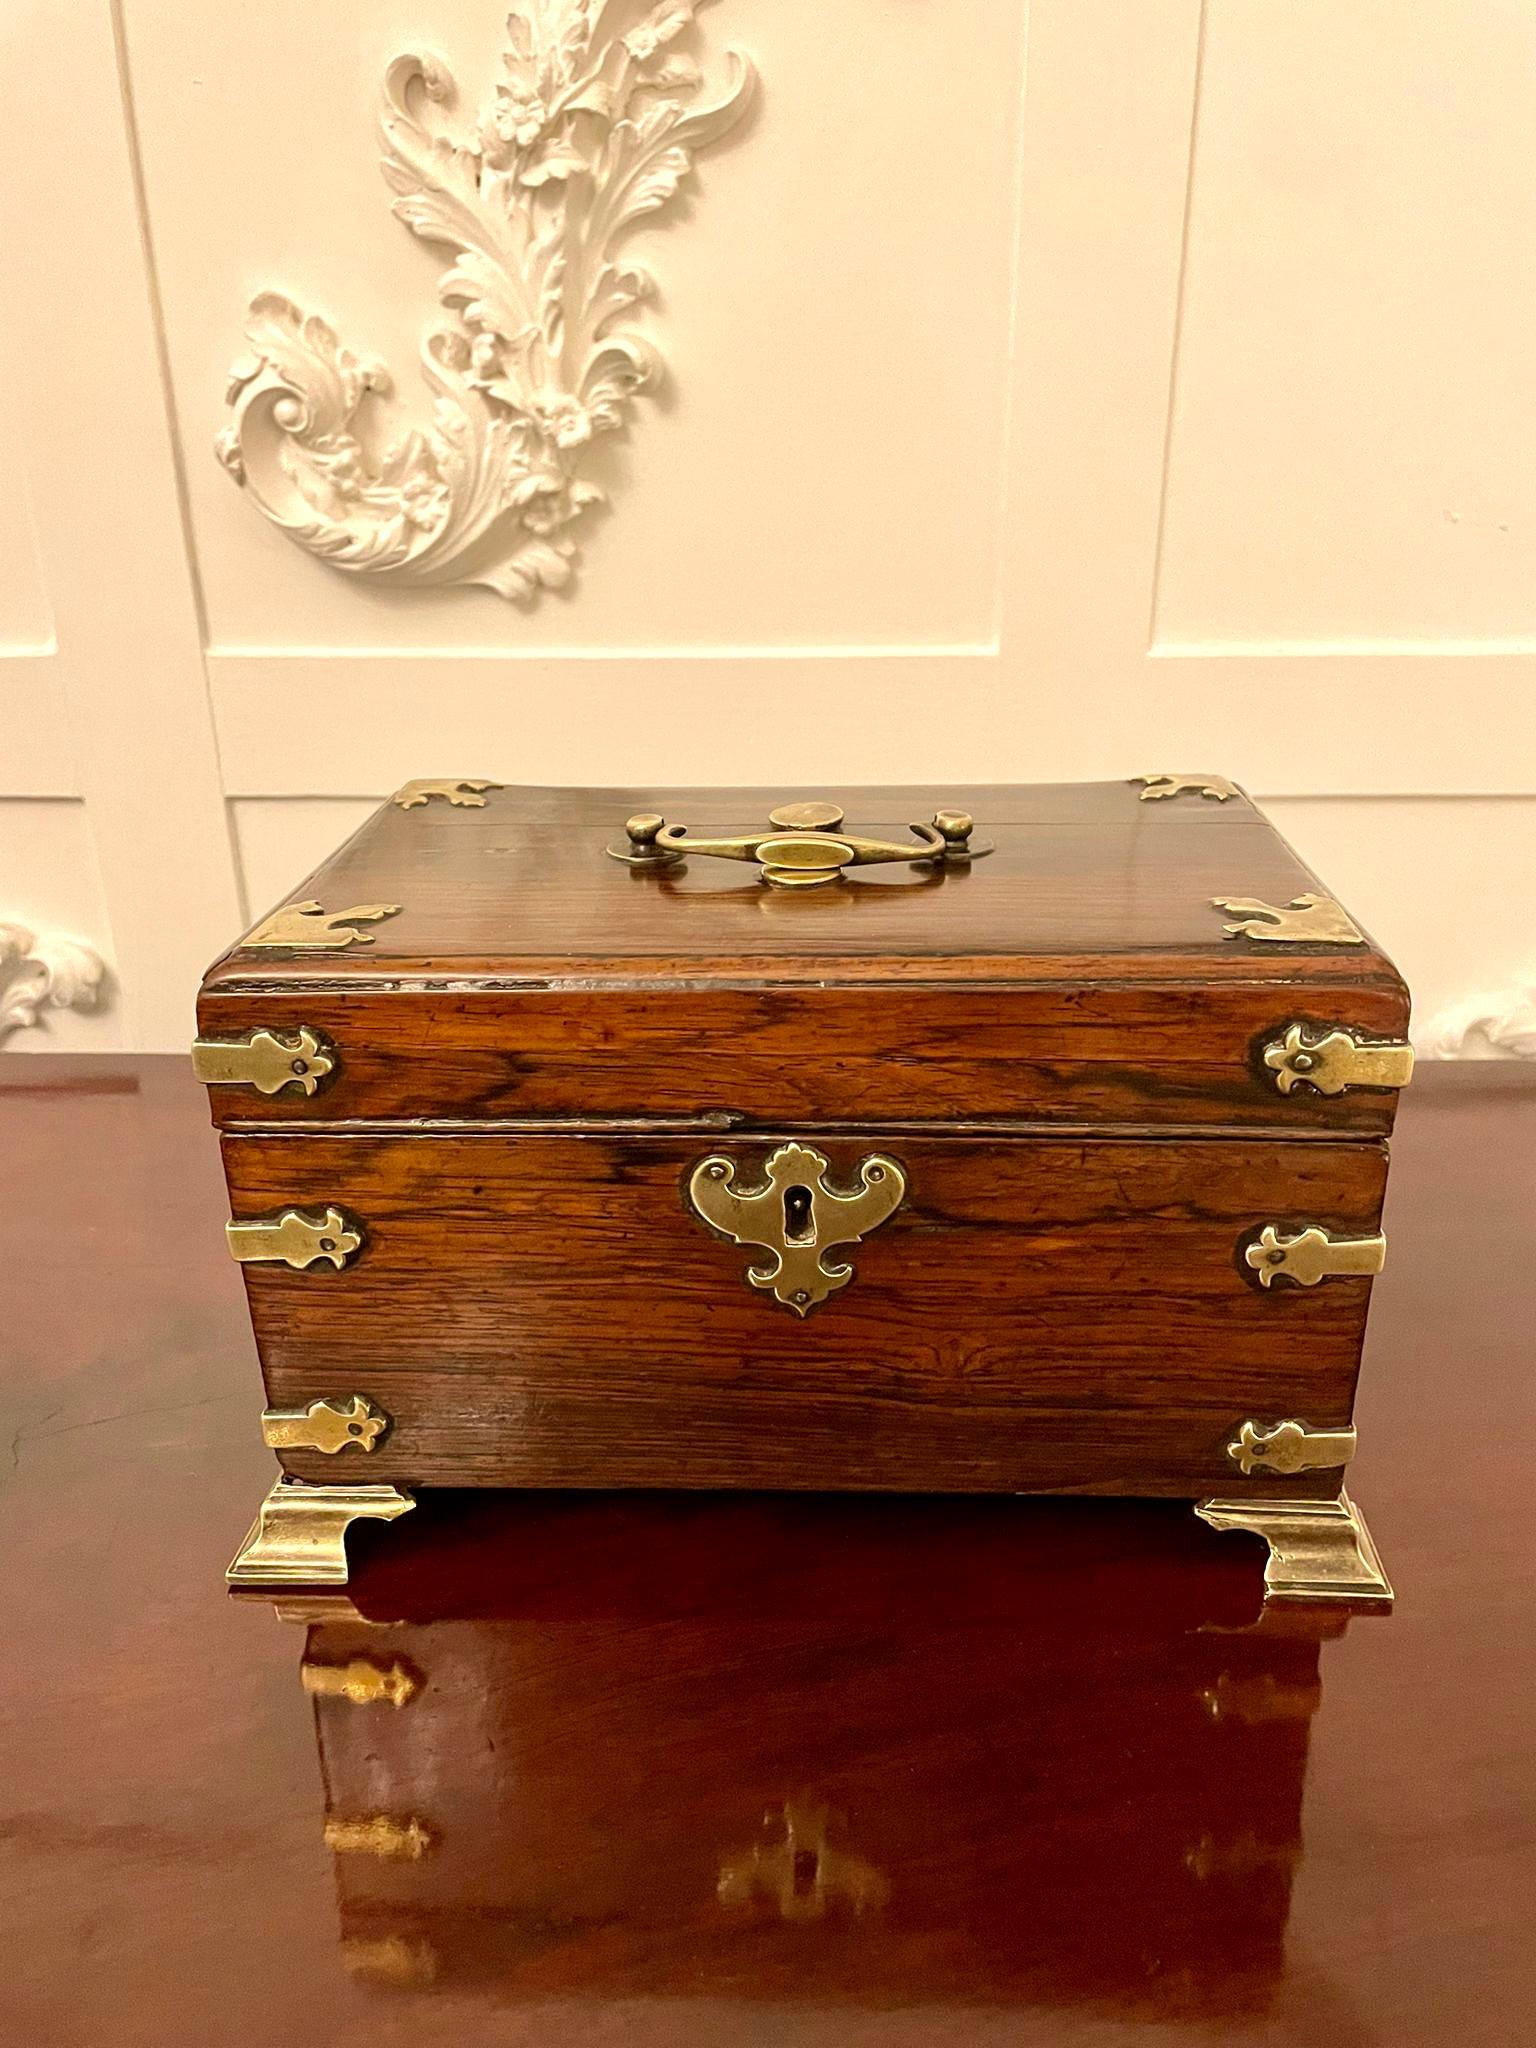 Antique George III quality rosewood and brass tea caddy having a quality George III rosewood tea caddy with original brass mounts, handle and key opening to reveal three original tea caddies

A charming original example

H 14.5 x W 25 x D 16cm 
Date